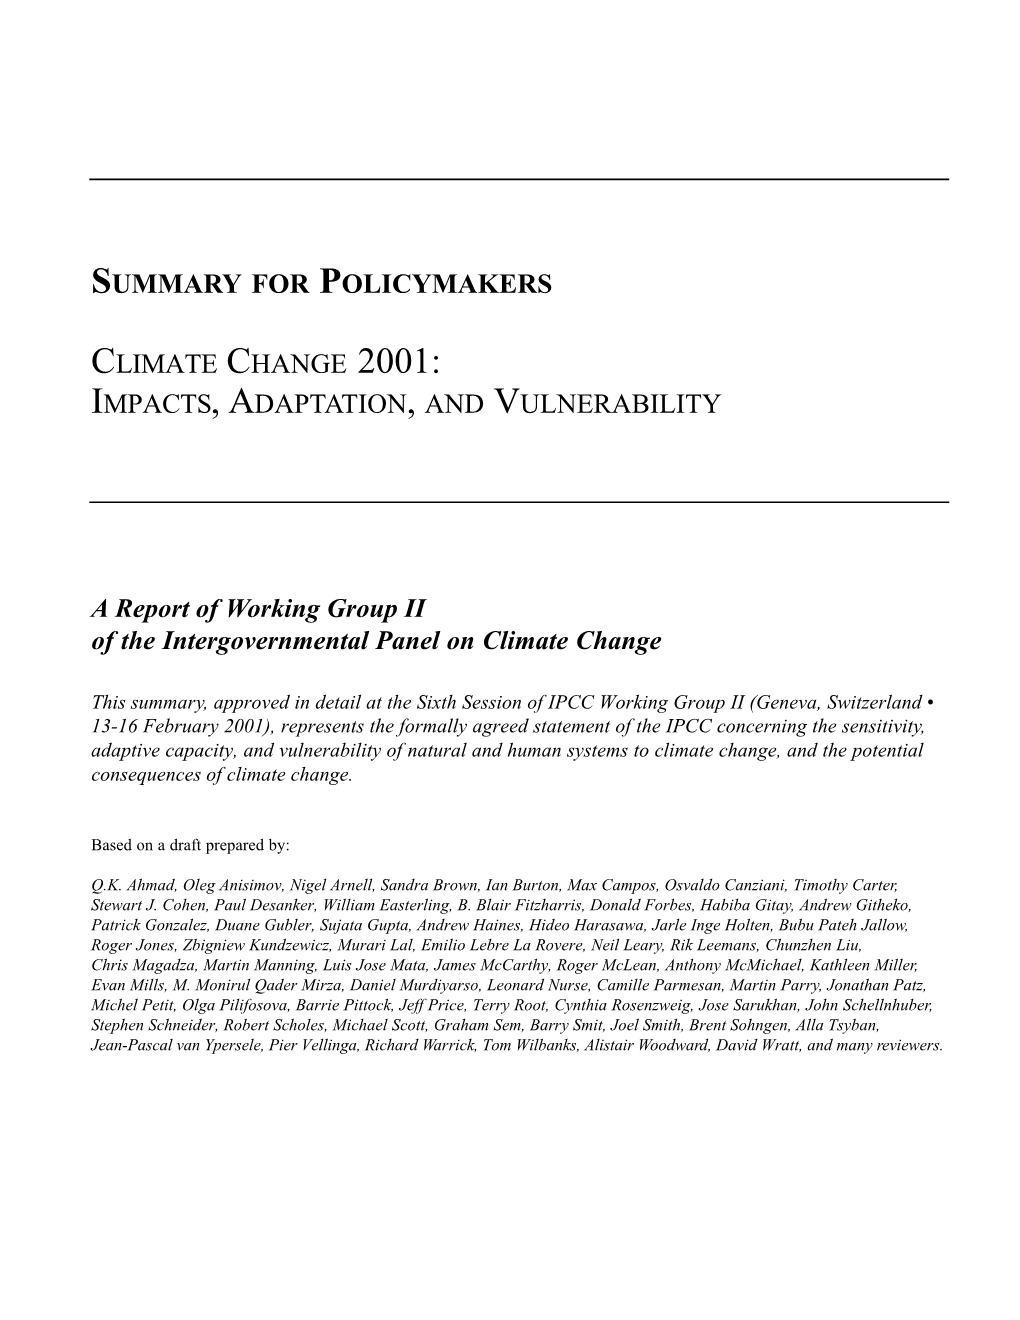 Summary for Policymakers Climate Change 2001